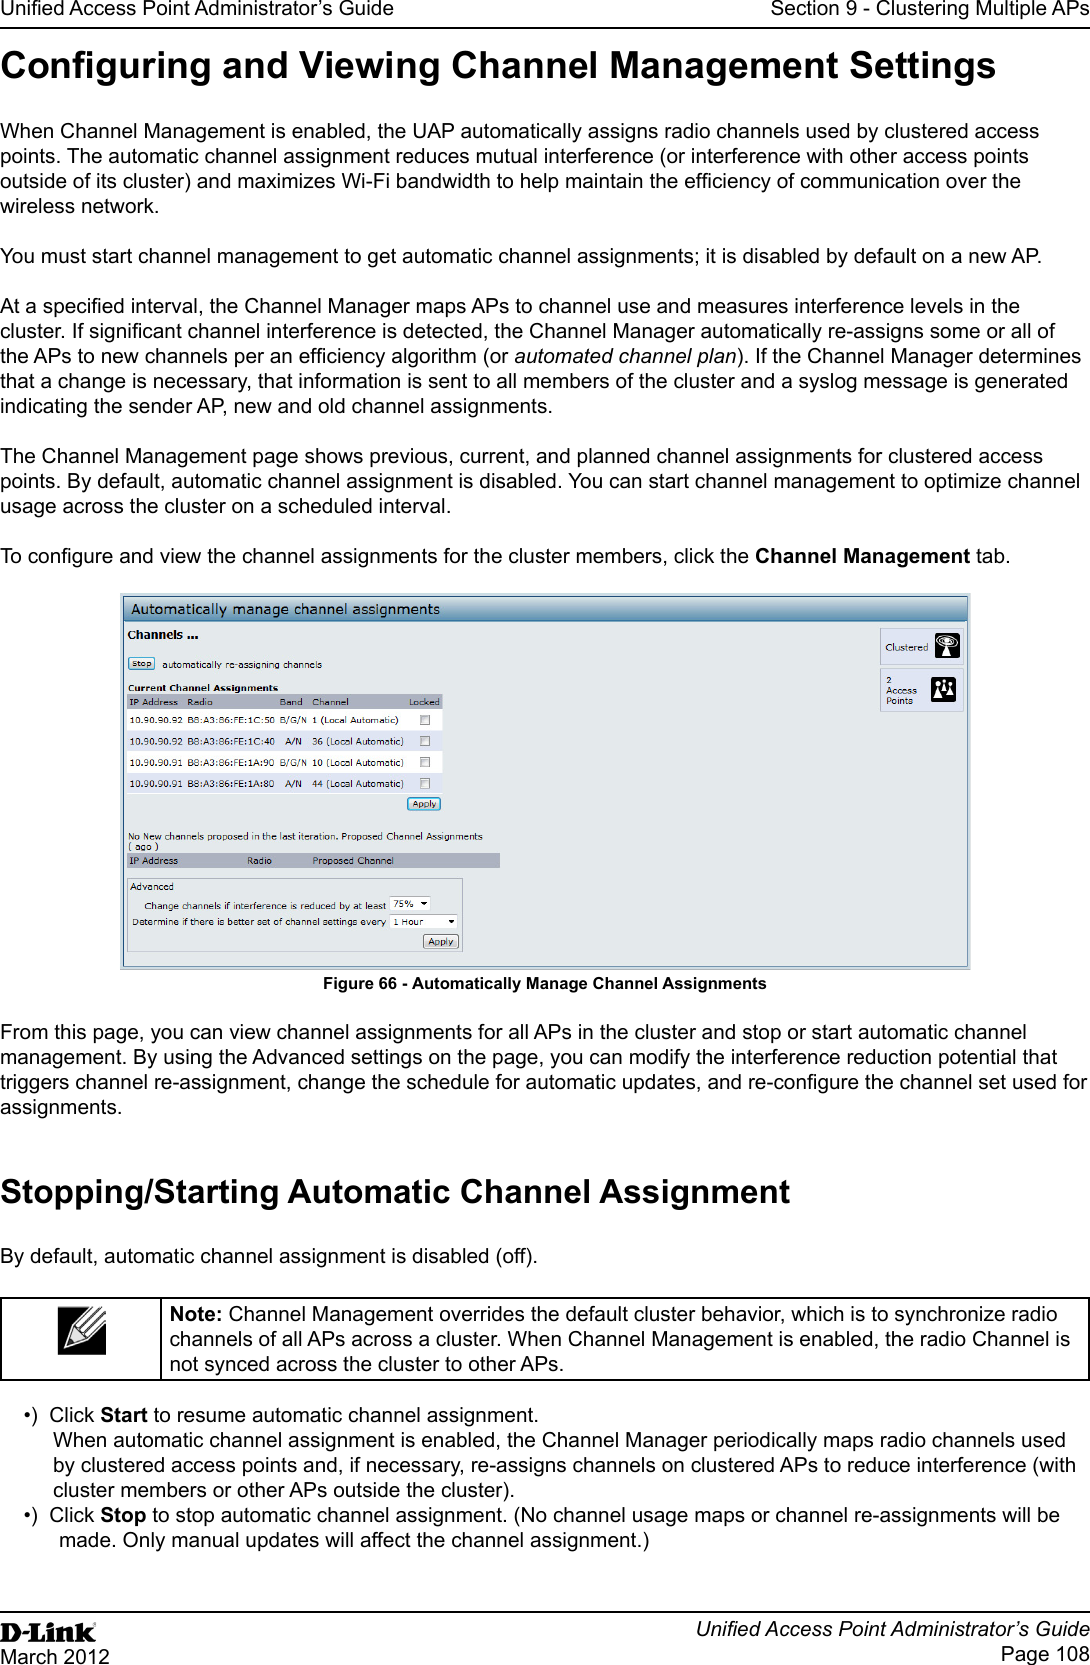 Unied Access Point Administrator’s GuideUnied Access Point Administrator’s GuidePage 108March 2012Section 9 - Clustering Multiple APsConguring and Viewing Channel Management SettingsWhen Channel Management is enabled, the UAP automatically assigns radio channels used by clustered access points. The automatic channel assignment reduces mutual interference (or interference with other access points outside of its cluster) and maximizes Wi-Fi bandwidth to help maintain the efciency of communication over the wireless network.You must start channel management to get automatic channel assignments; it is disabled by default on a new AP.At a specied interval, the Channel Manager maps APs to channel use and measures interference levels in the cluster. If signicant channel interference is detected, the Channel Manager automatically re-assigns some or all of the APs to new channels per an efciency algorithm (or automated channel plan). If the Channel Manager determines that a change is necessary, that information is sent to all members of the cluster and a syslog message is generated indicating the sender AP, new and old channel assignments.The Channel Management page shows previous, current, and planned channel assignments for clustered access points. By default, automatic channel assignment is disabled. You can start channel management to optimize channel usage across the cluster on a scheduled interval.To congure and view the channel assignments for the cluster members, click the Channel Management tab.Figure 66 - Automatically Manage Channel AssignmentsFrom this page, you can view channel assignments for all APs in the cluster and stop or start automatic channel management. By using the Advanced settings on the page, you can modify the interference reduction potential that triggers channel re-assignment, change the schedule for automatic updates, and re-congure the channel set used for assignments.Stopping/Starting Automatic Channel AssignmentBy default, automatic channel assignment is disabled (off).Note: Channel Management overrides the default cluster behavior, which is to synchronize radio channels of all APs across a cluster. When Channel Management is enabled, the radio Channel is not synced across the cluster to other APs. •)  Click Start to resume automatic channel assignment.When automatic channel assignment is enabled, the Channel Manager periodically maps radio channels used by clustered access points and, if necessary, re-assigns channels on clustered APs to reduce interference (with cluster members or other APs outside the cluster).•)  Click Stop to stop automatic channel assignment. (No channel usage maps or channel re-assignments will be made. Only manual updates will affect the channel assignment.)